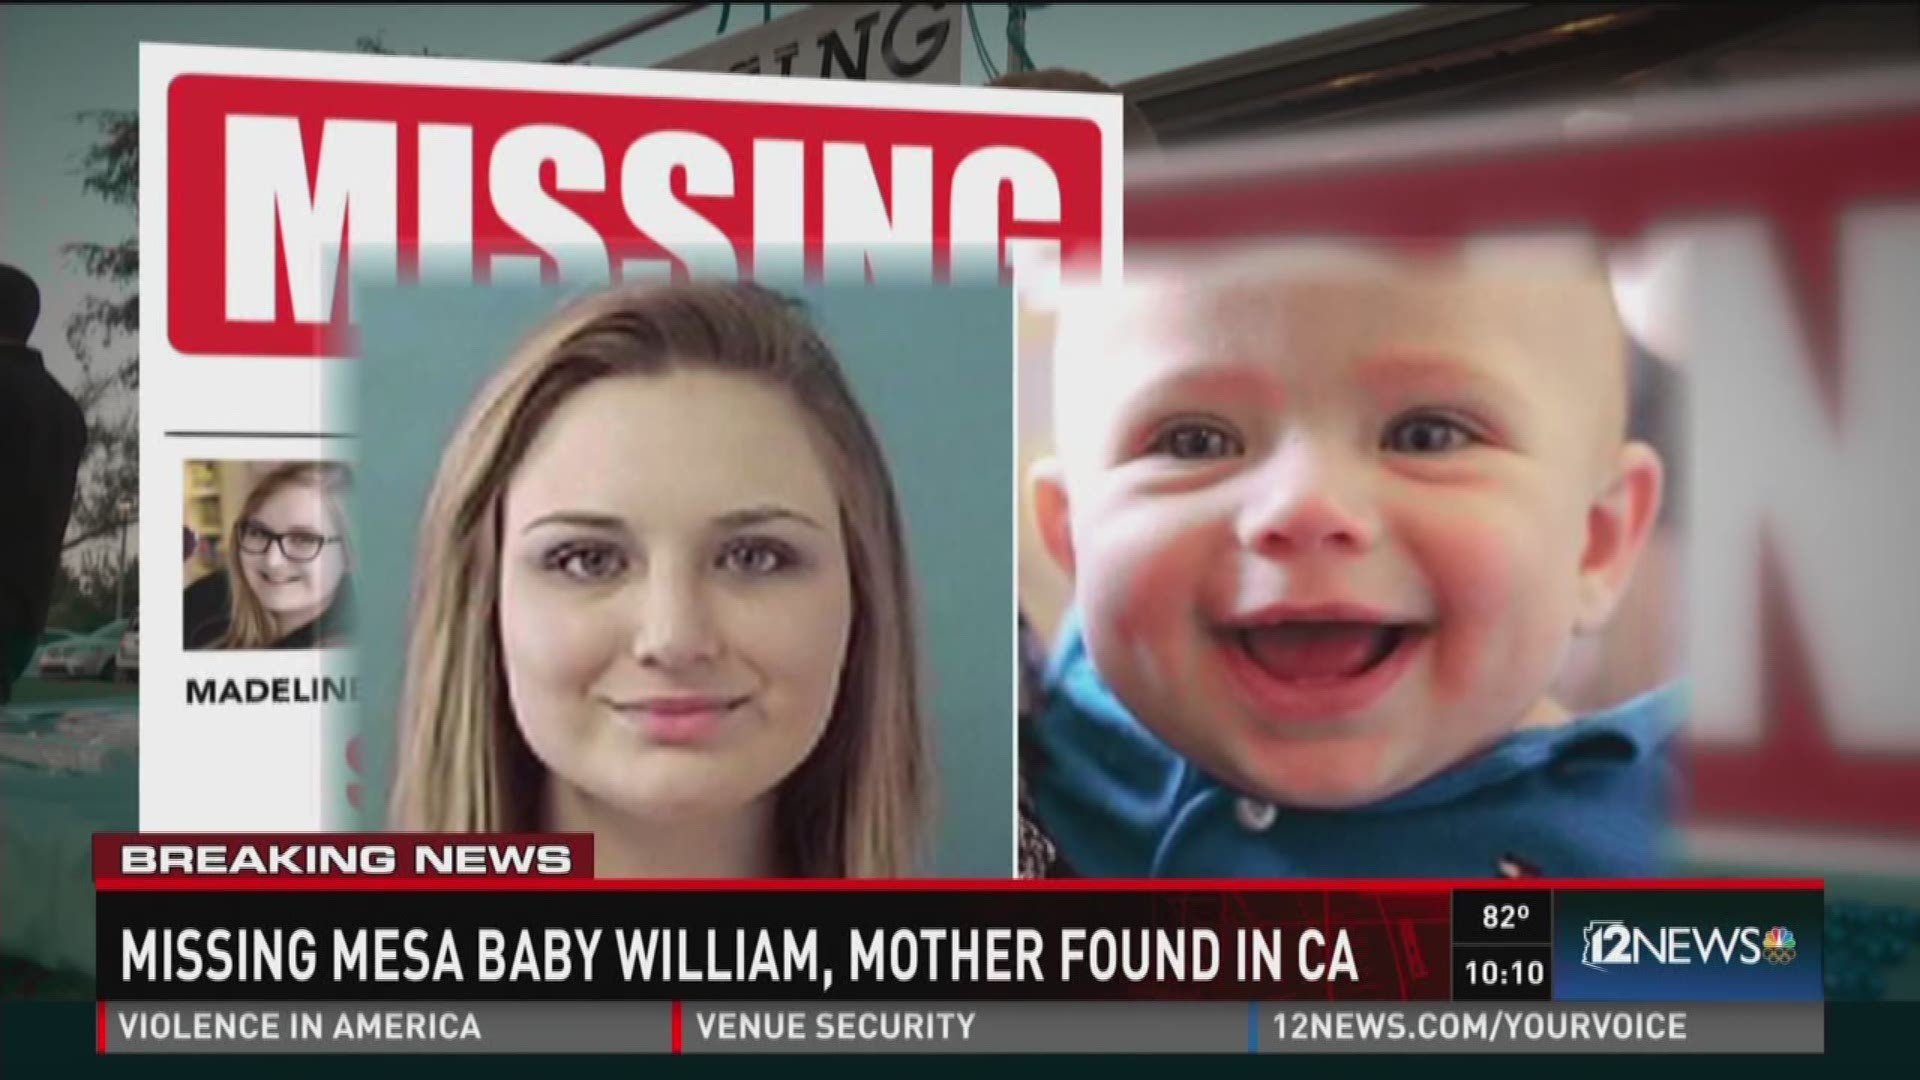 Madeline Jones and her son William were found by police in San Diego after a three-month search.